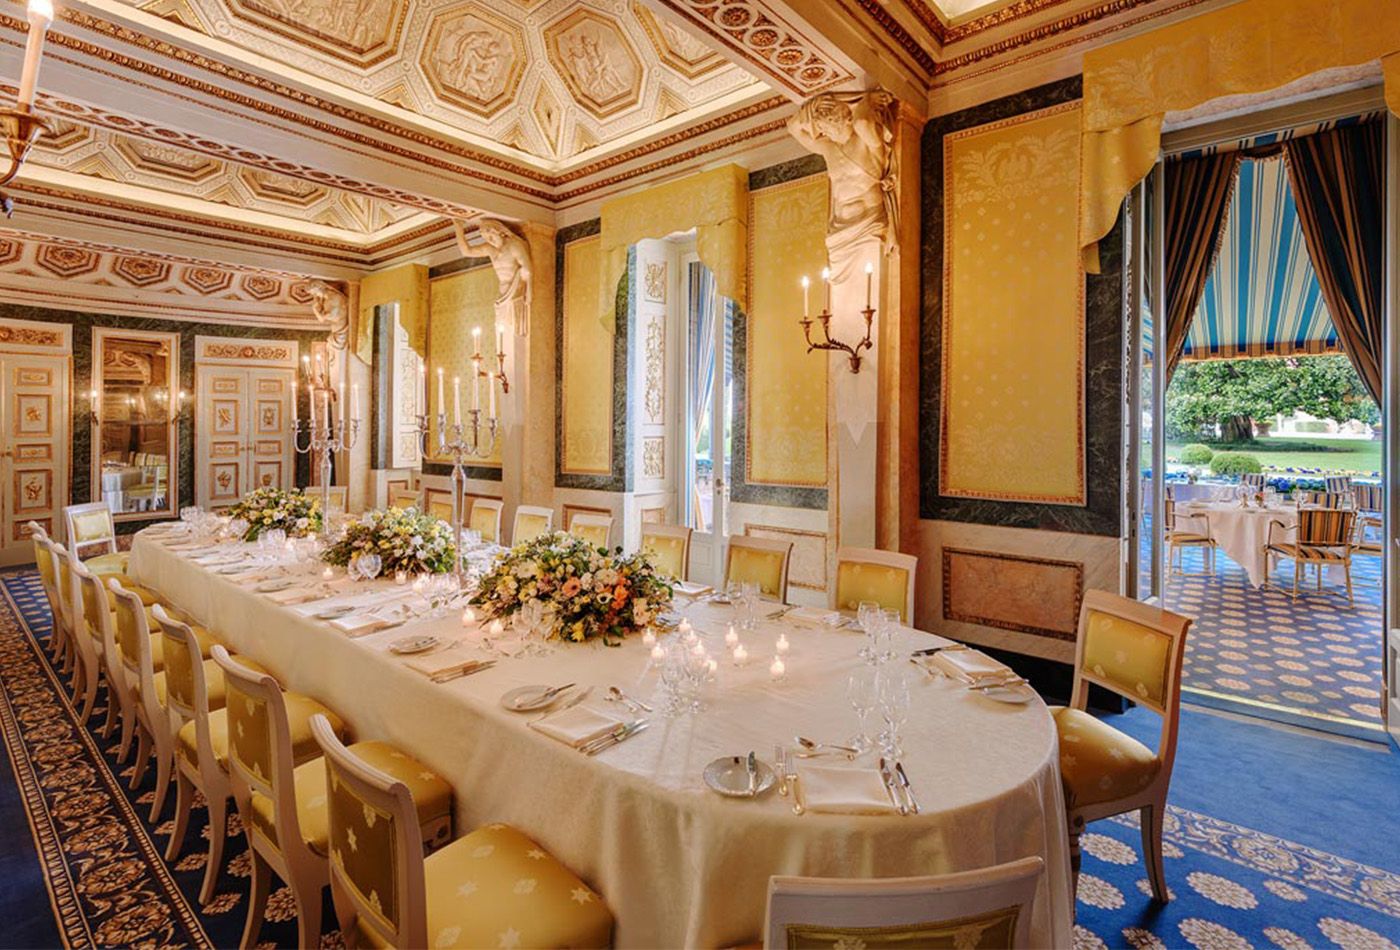 Grand dining hall with golden chairs, walls and ceiling art